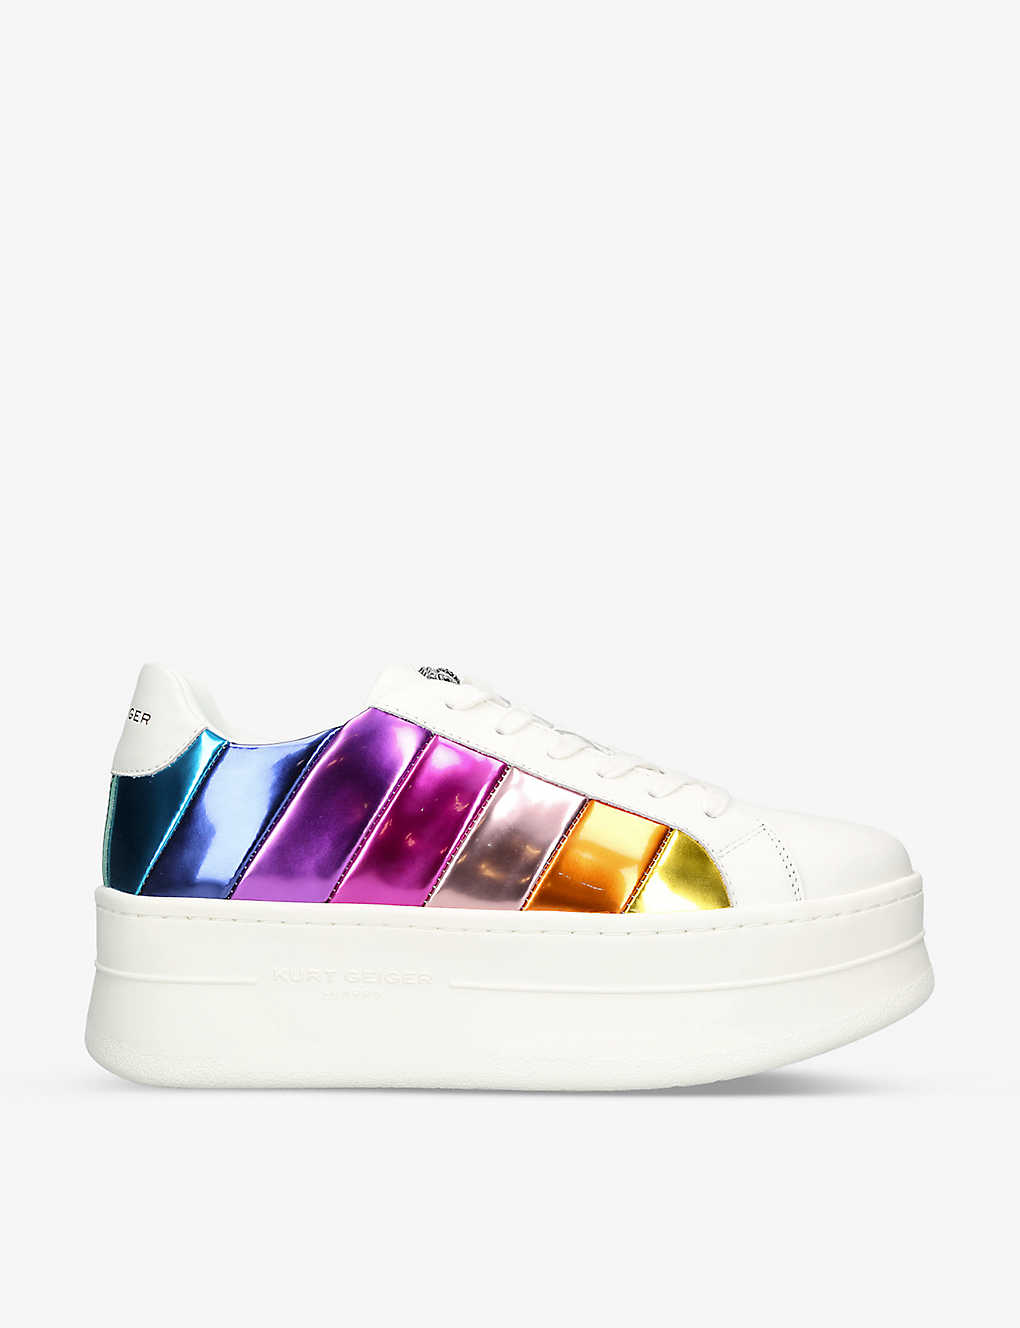 Shop Kurt Geiger Laney Pumped Platform-sole Striped Leather Low-top Trainers In Multi-coloured